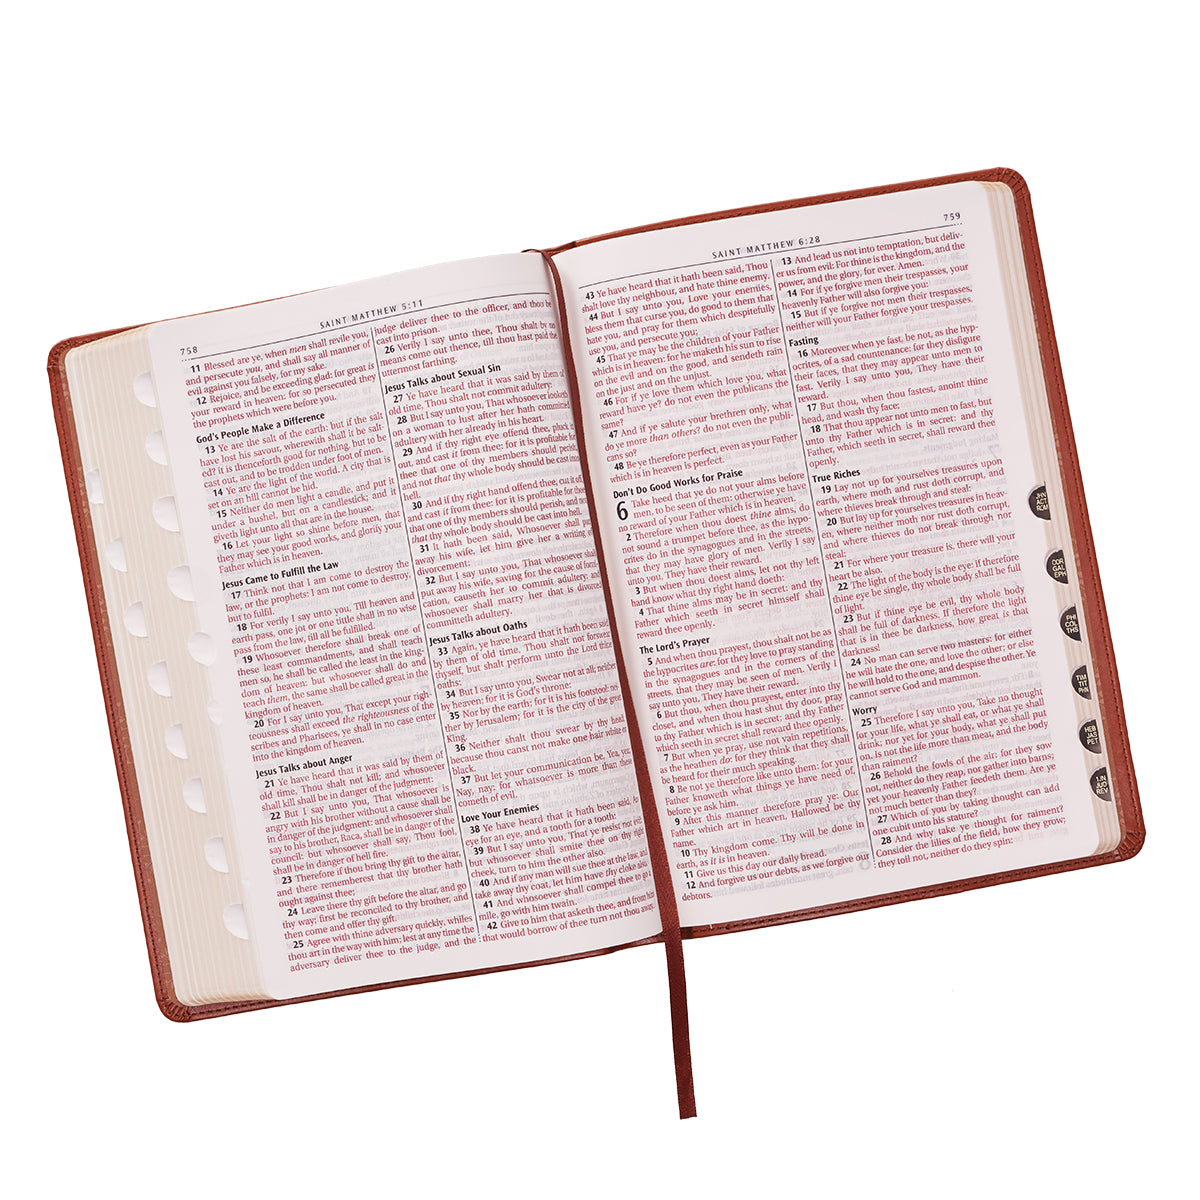 Image of KJV Large Print Thumb Index Edition: Tan other